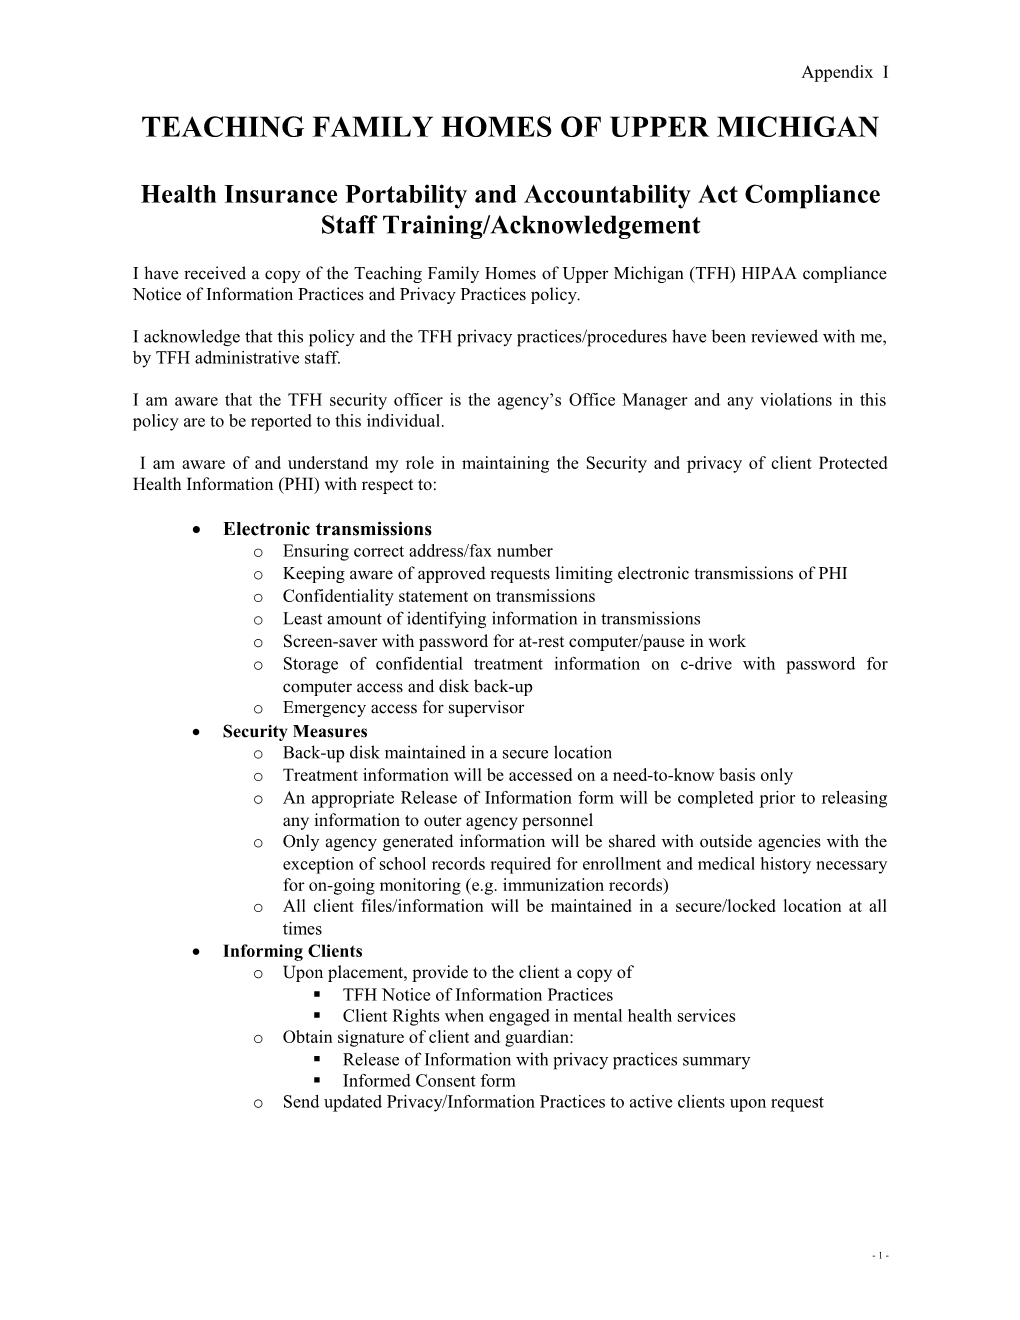 Health Insurance Portability and Accountability Act Compliance Training/Acknowledgement